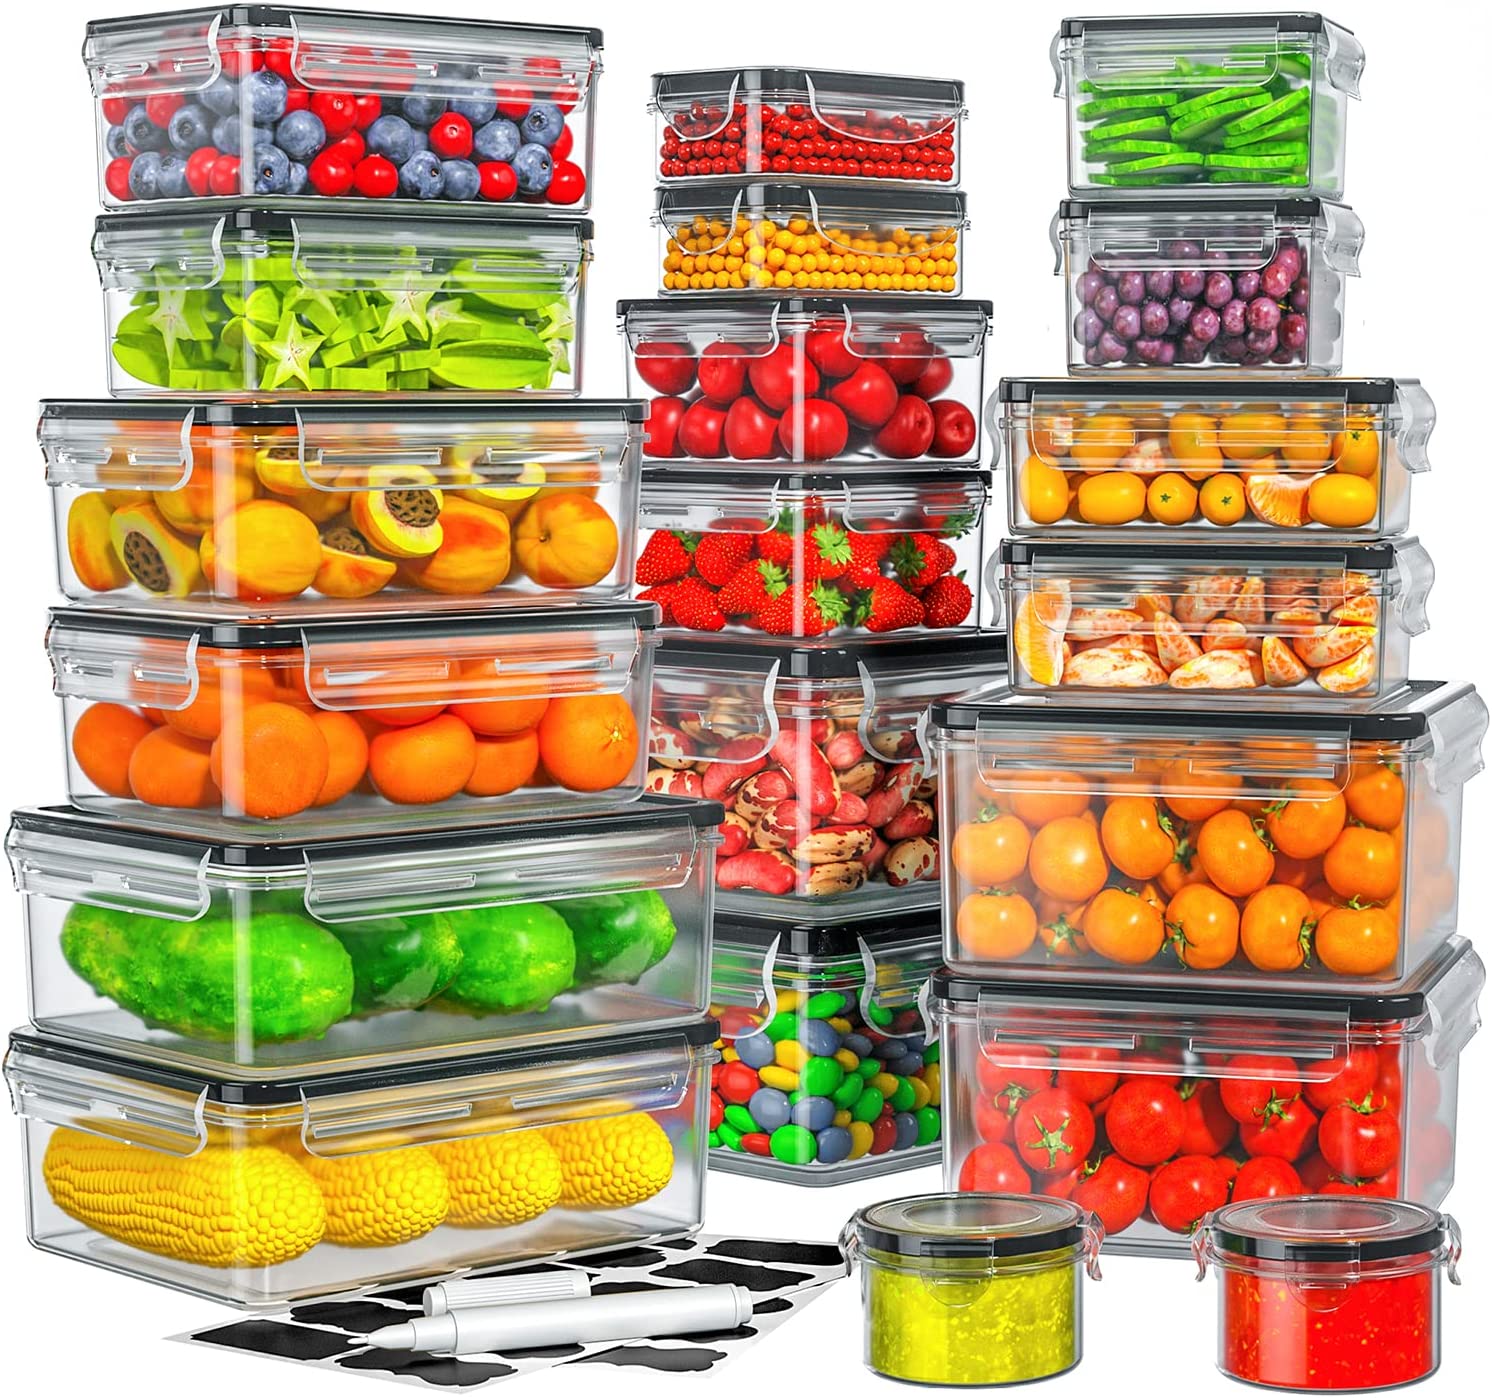 Prime Members: 40-Piece Hometall Airtight Plastic Food Storage Containers w/ Lids Set $25 + Free Shipping